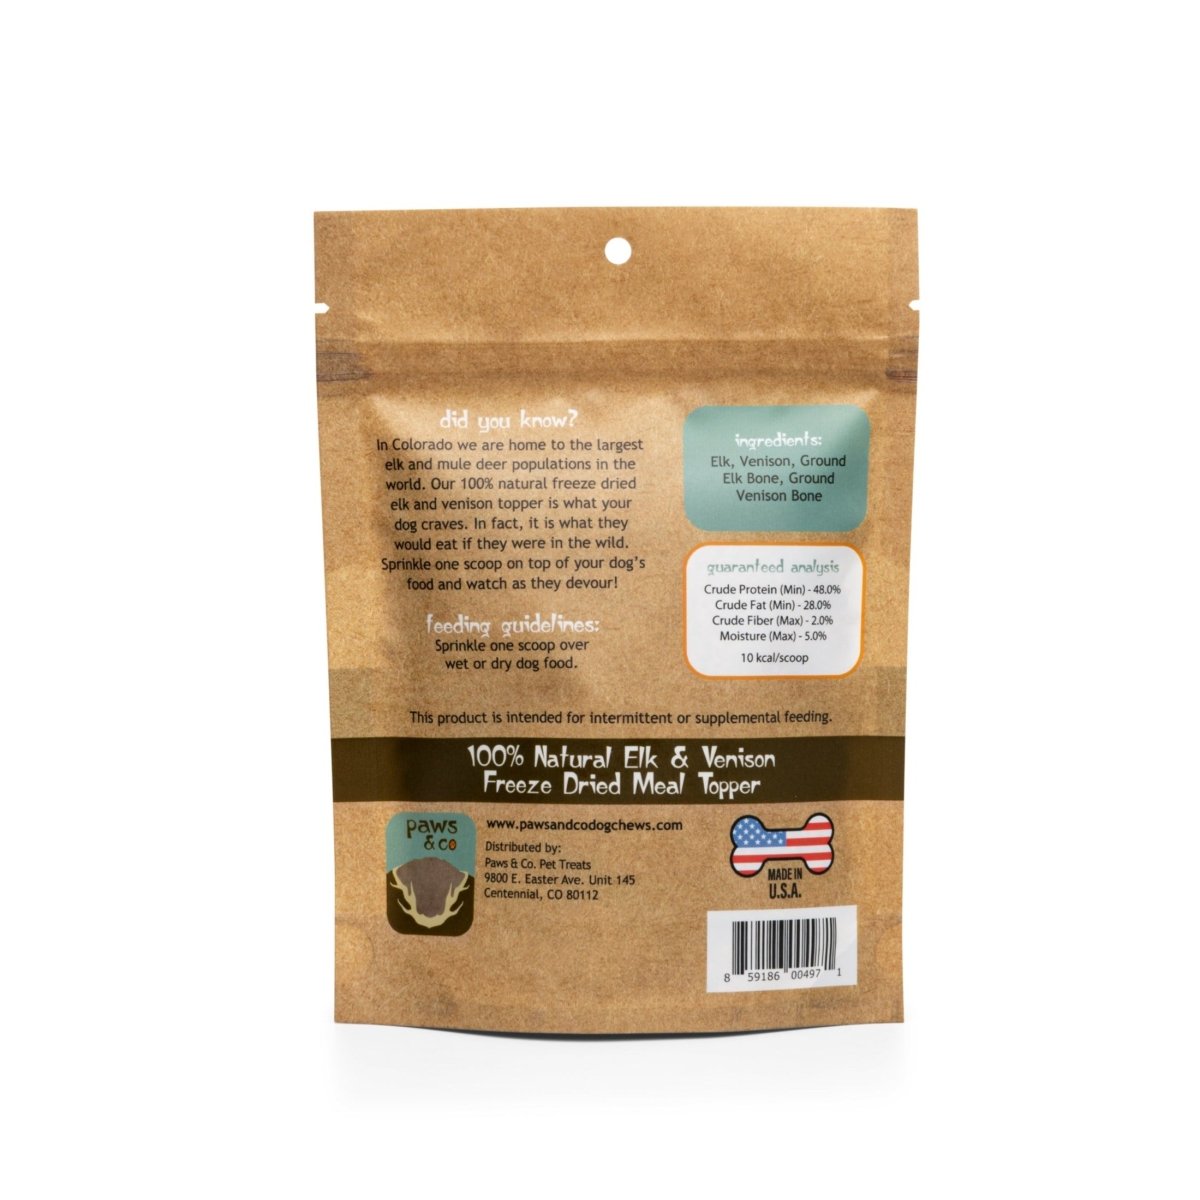 Elk & Venison Freeze Dried Meal Topper - Paws & Co Dog Chews